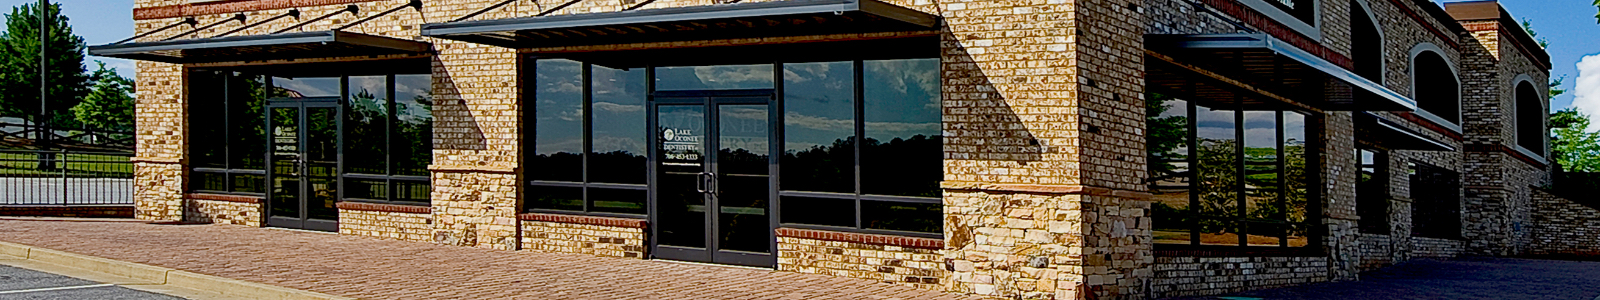 Outside view of dental office entrance